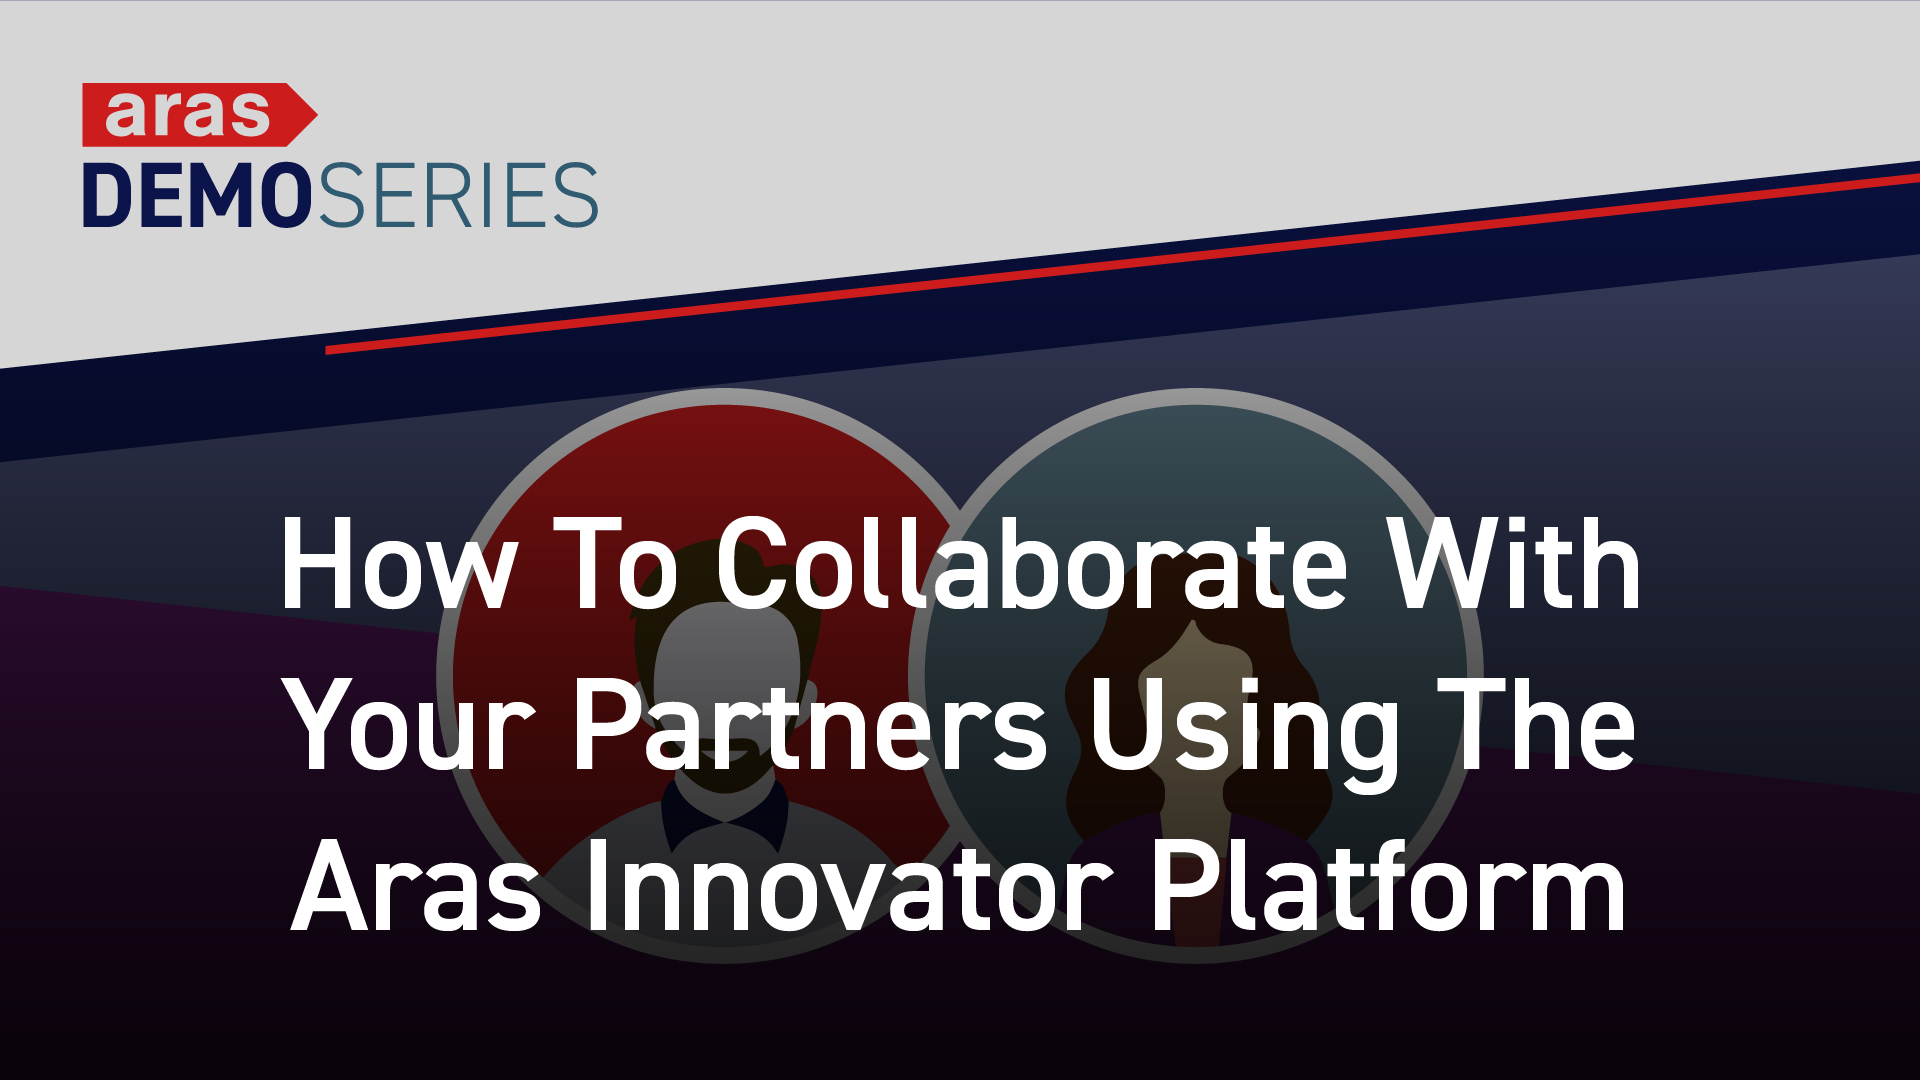 How To Collaborate With Your Partners Using The Aras Innovator Platform